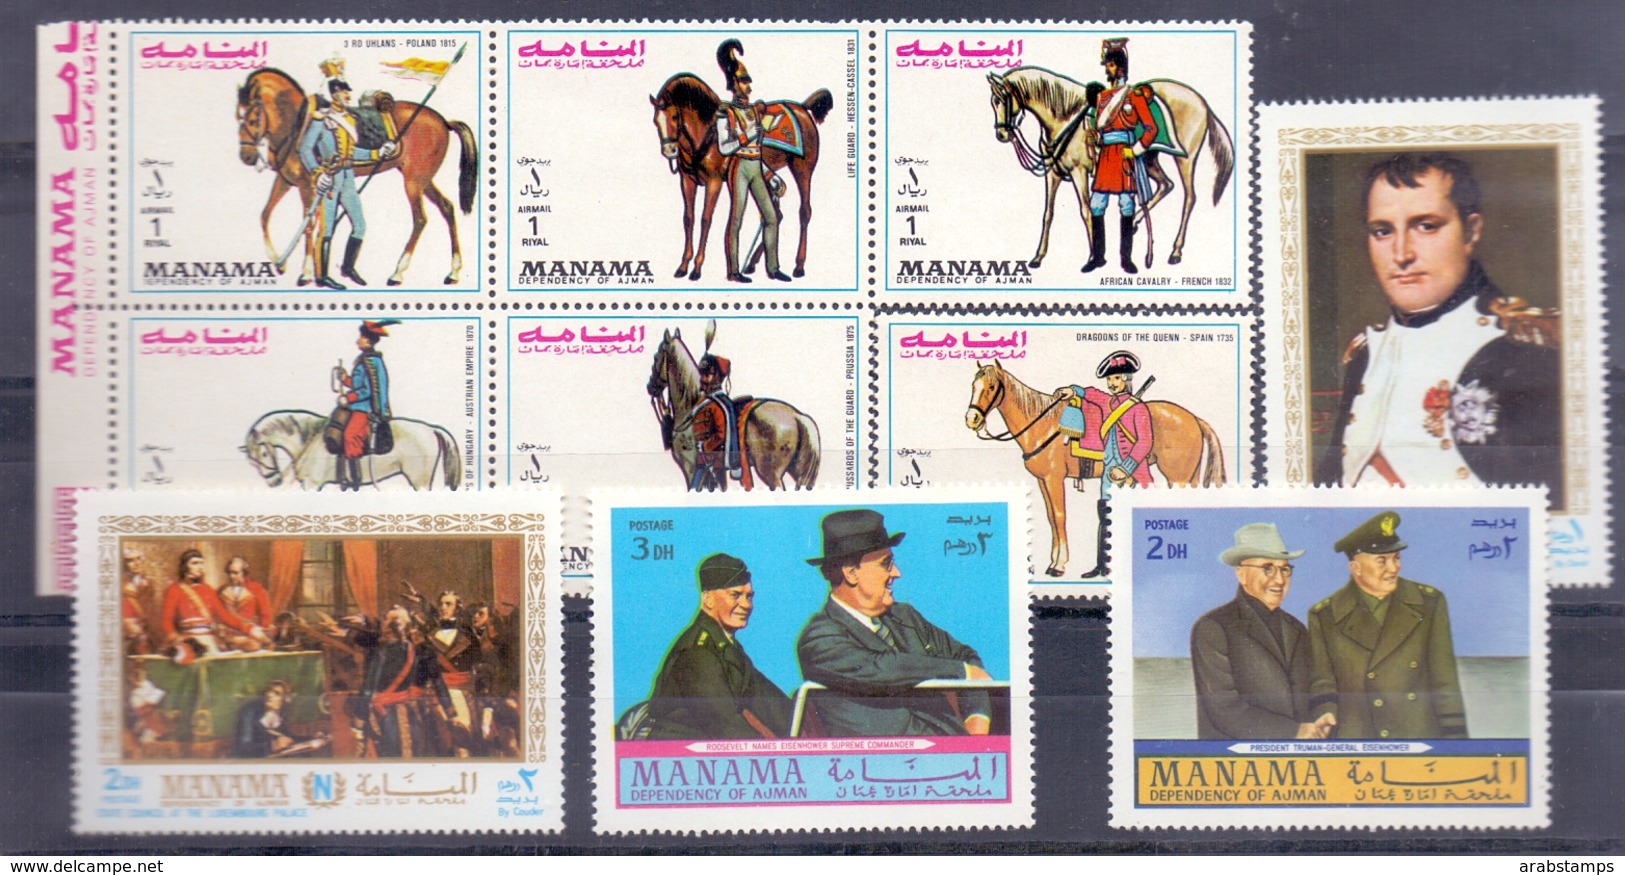 MANAMA 10 Stamps Different Collection MNH - Manama